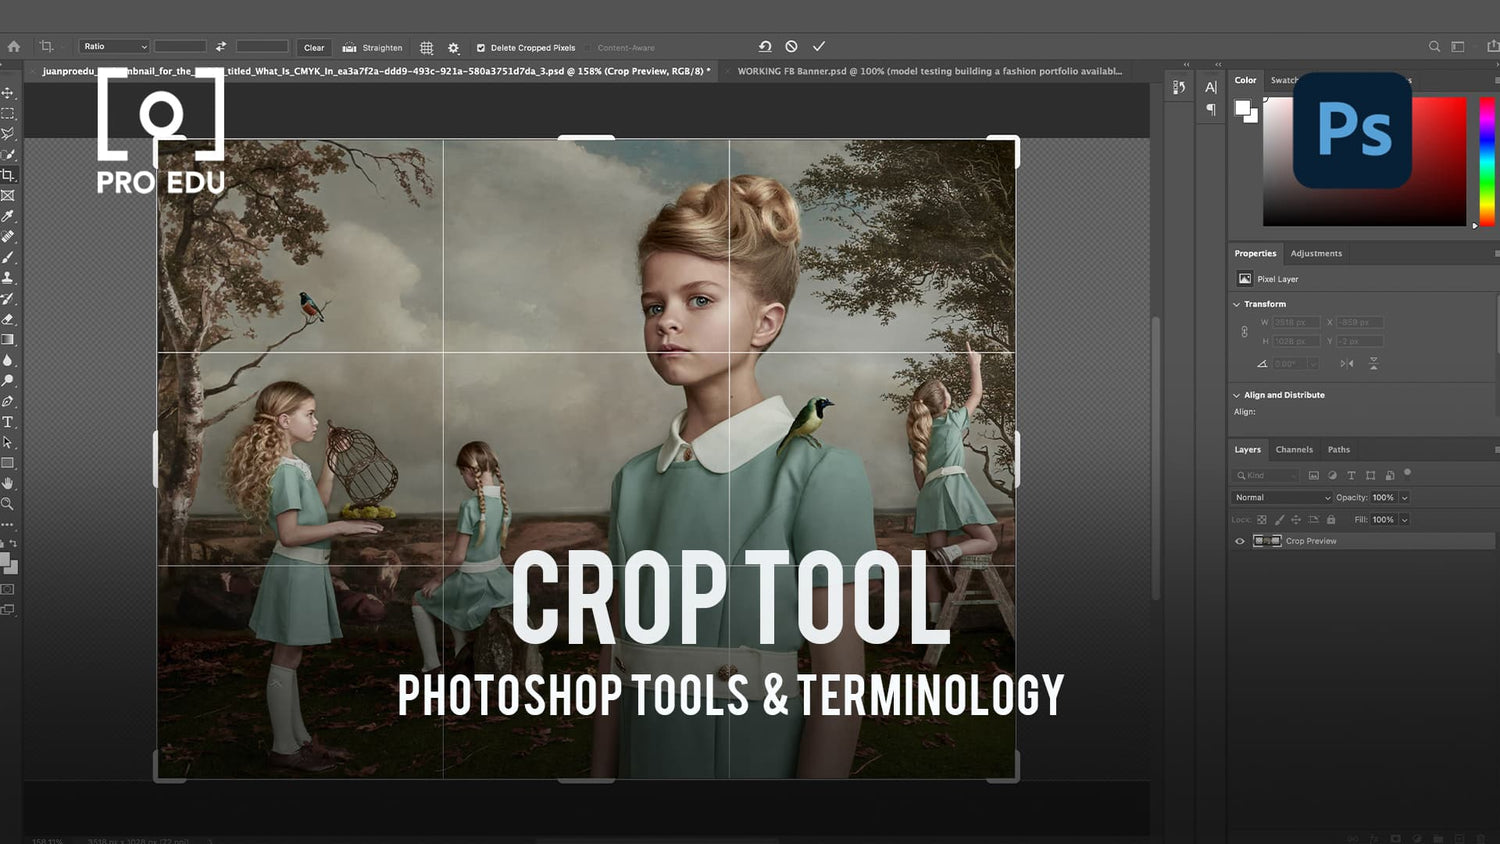 Crop Tool Functions in Photoshop - PRO EDU Guide